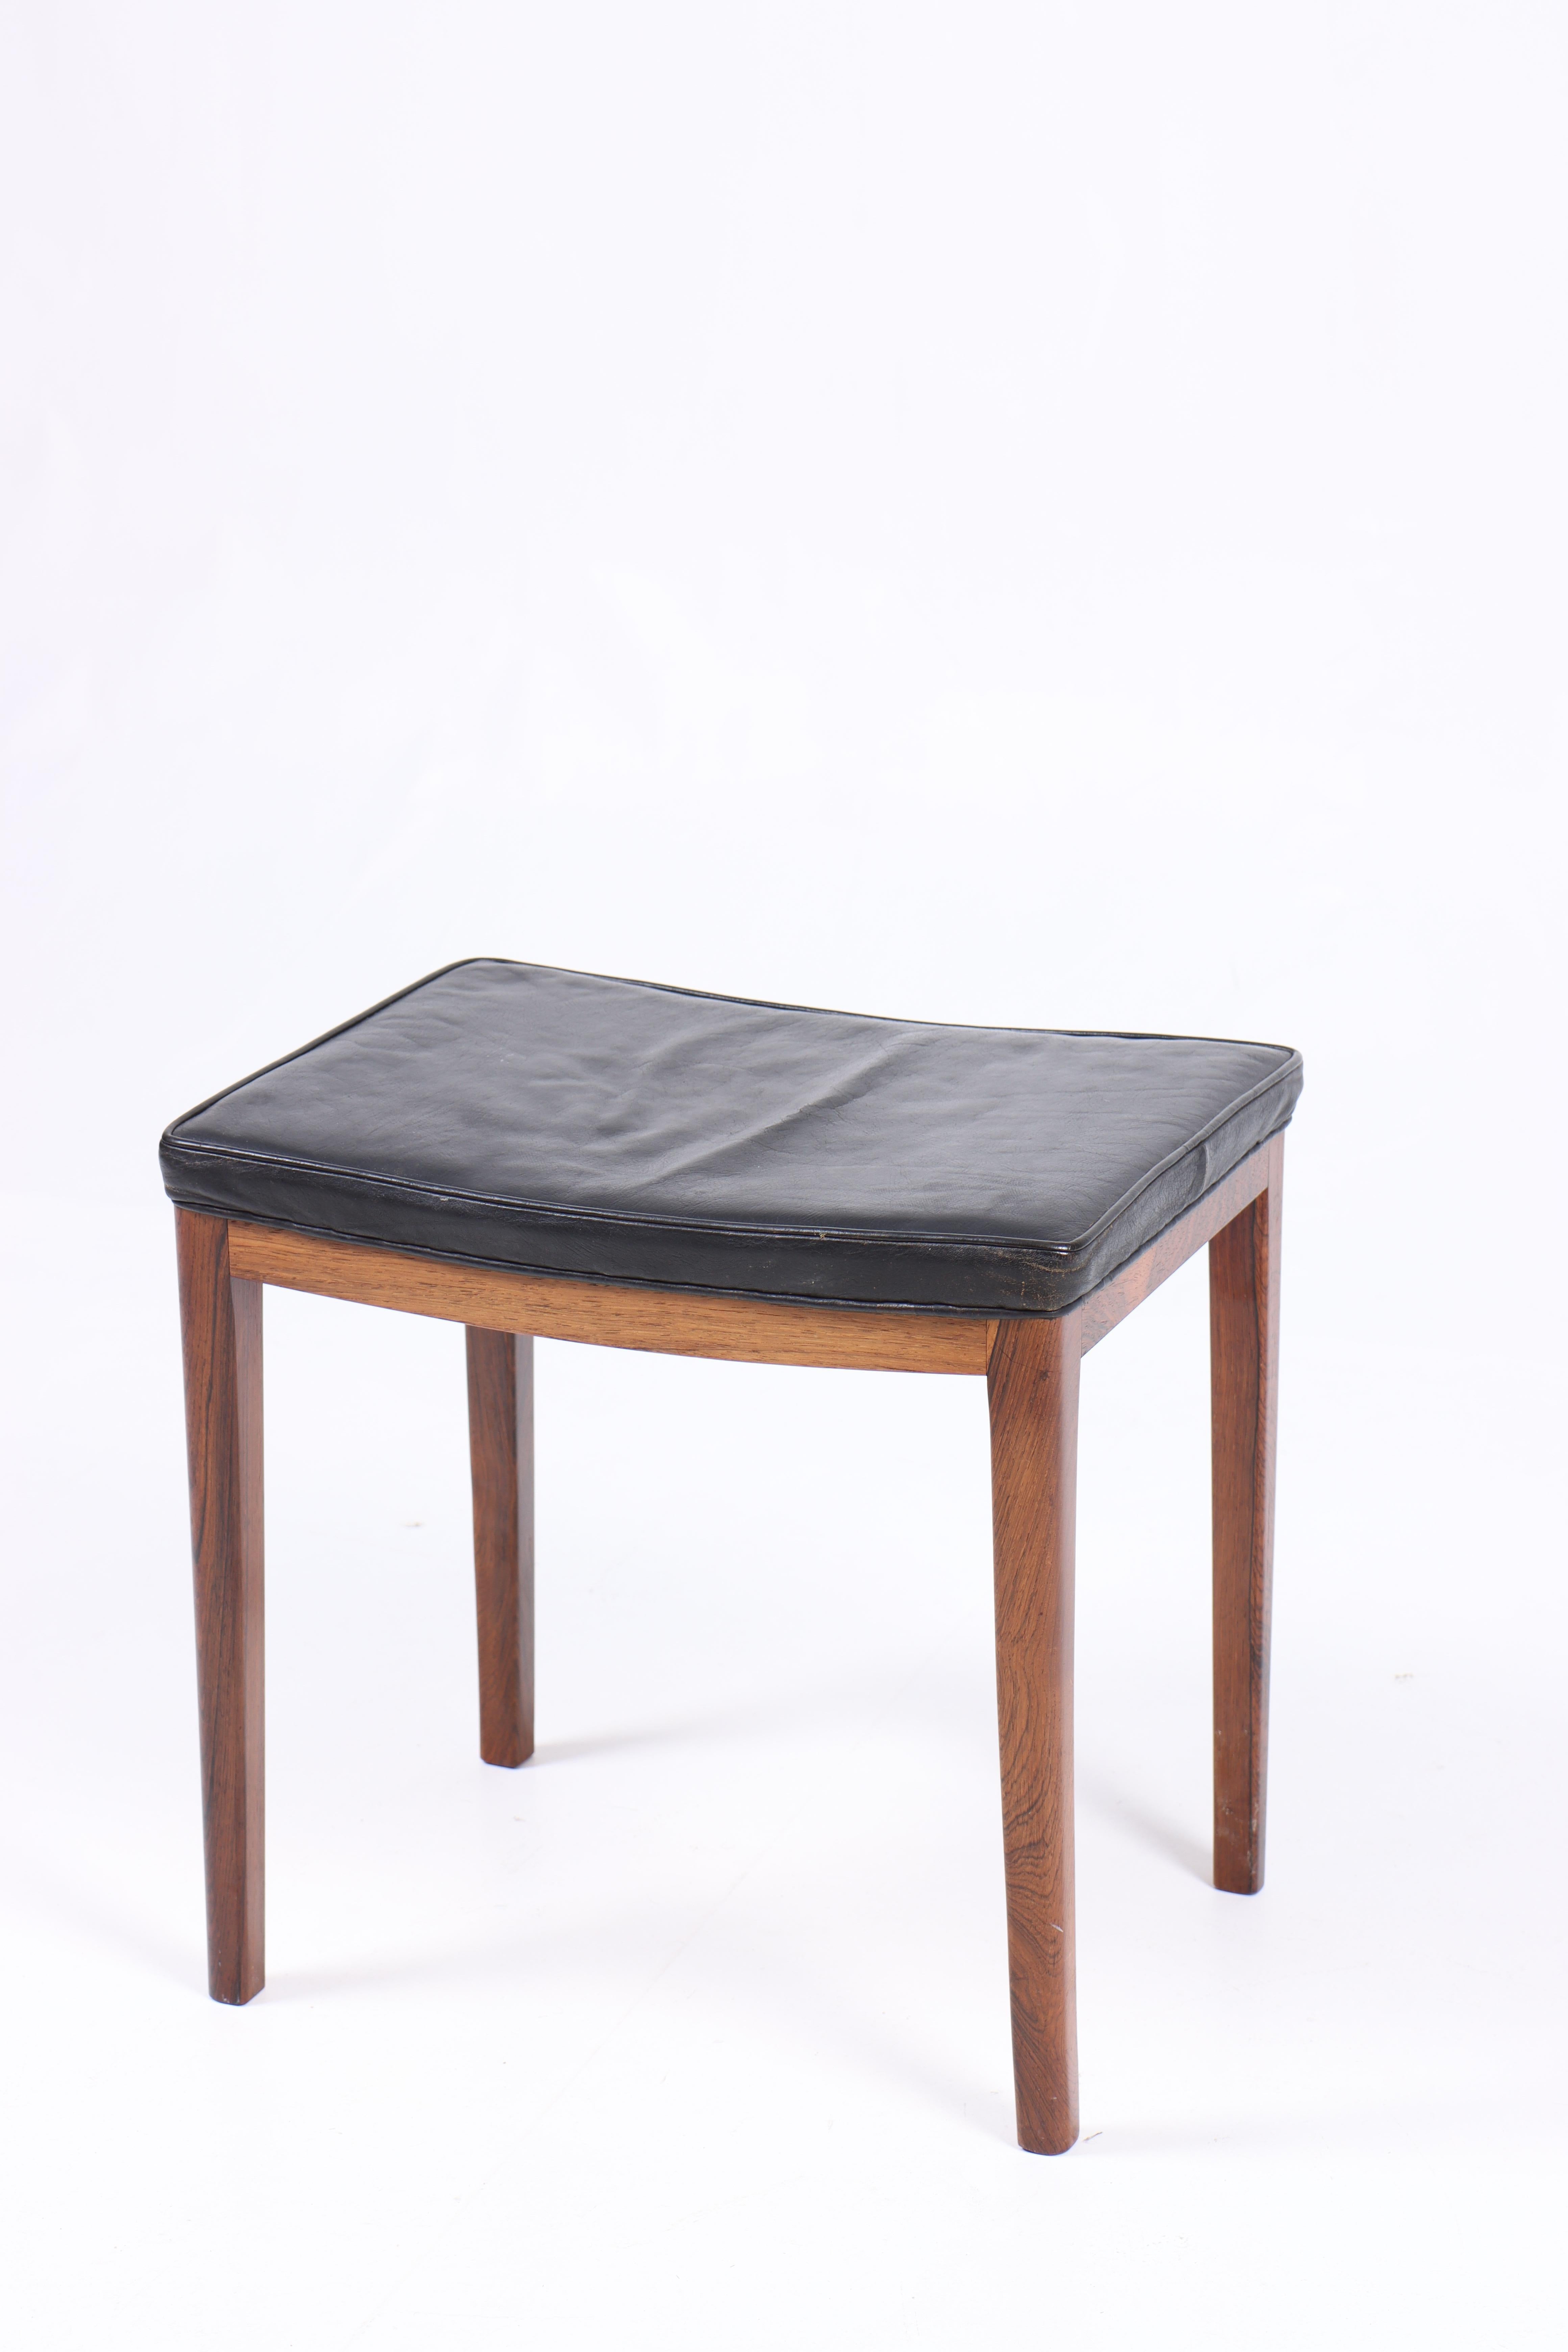 Stool in patinated leather and rosewood frame, designed and made in Denmark.